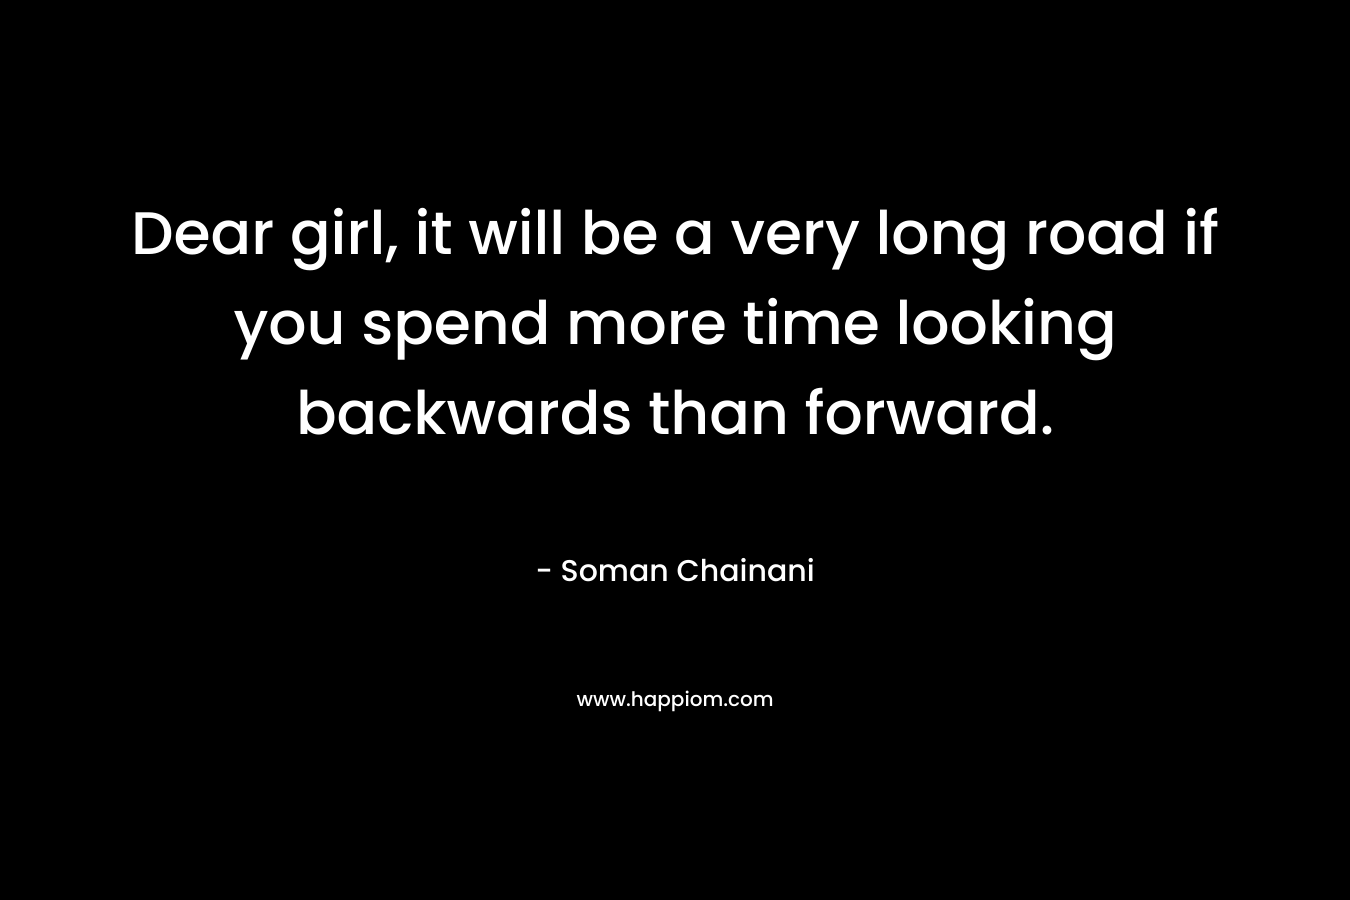 Dear girl, it will be a very long road if you spend more time looking backwards than forward. – Soman Chainani